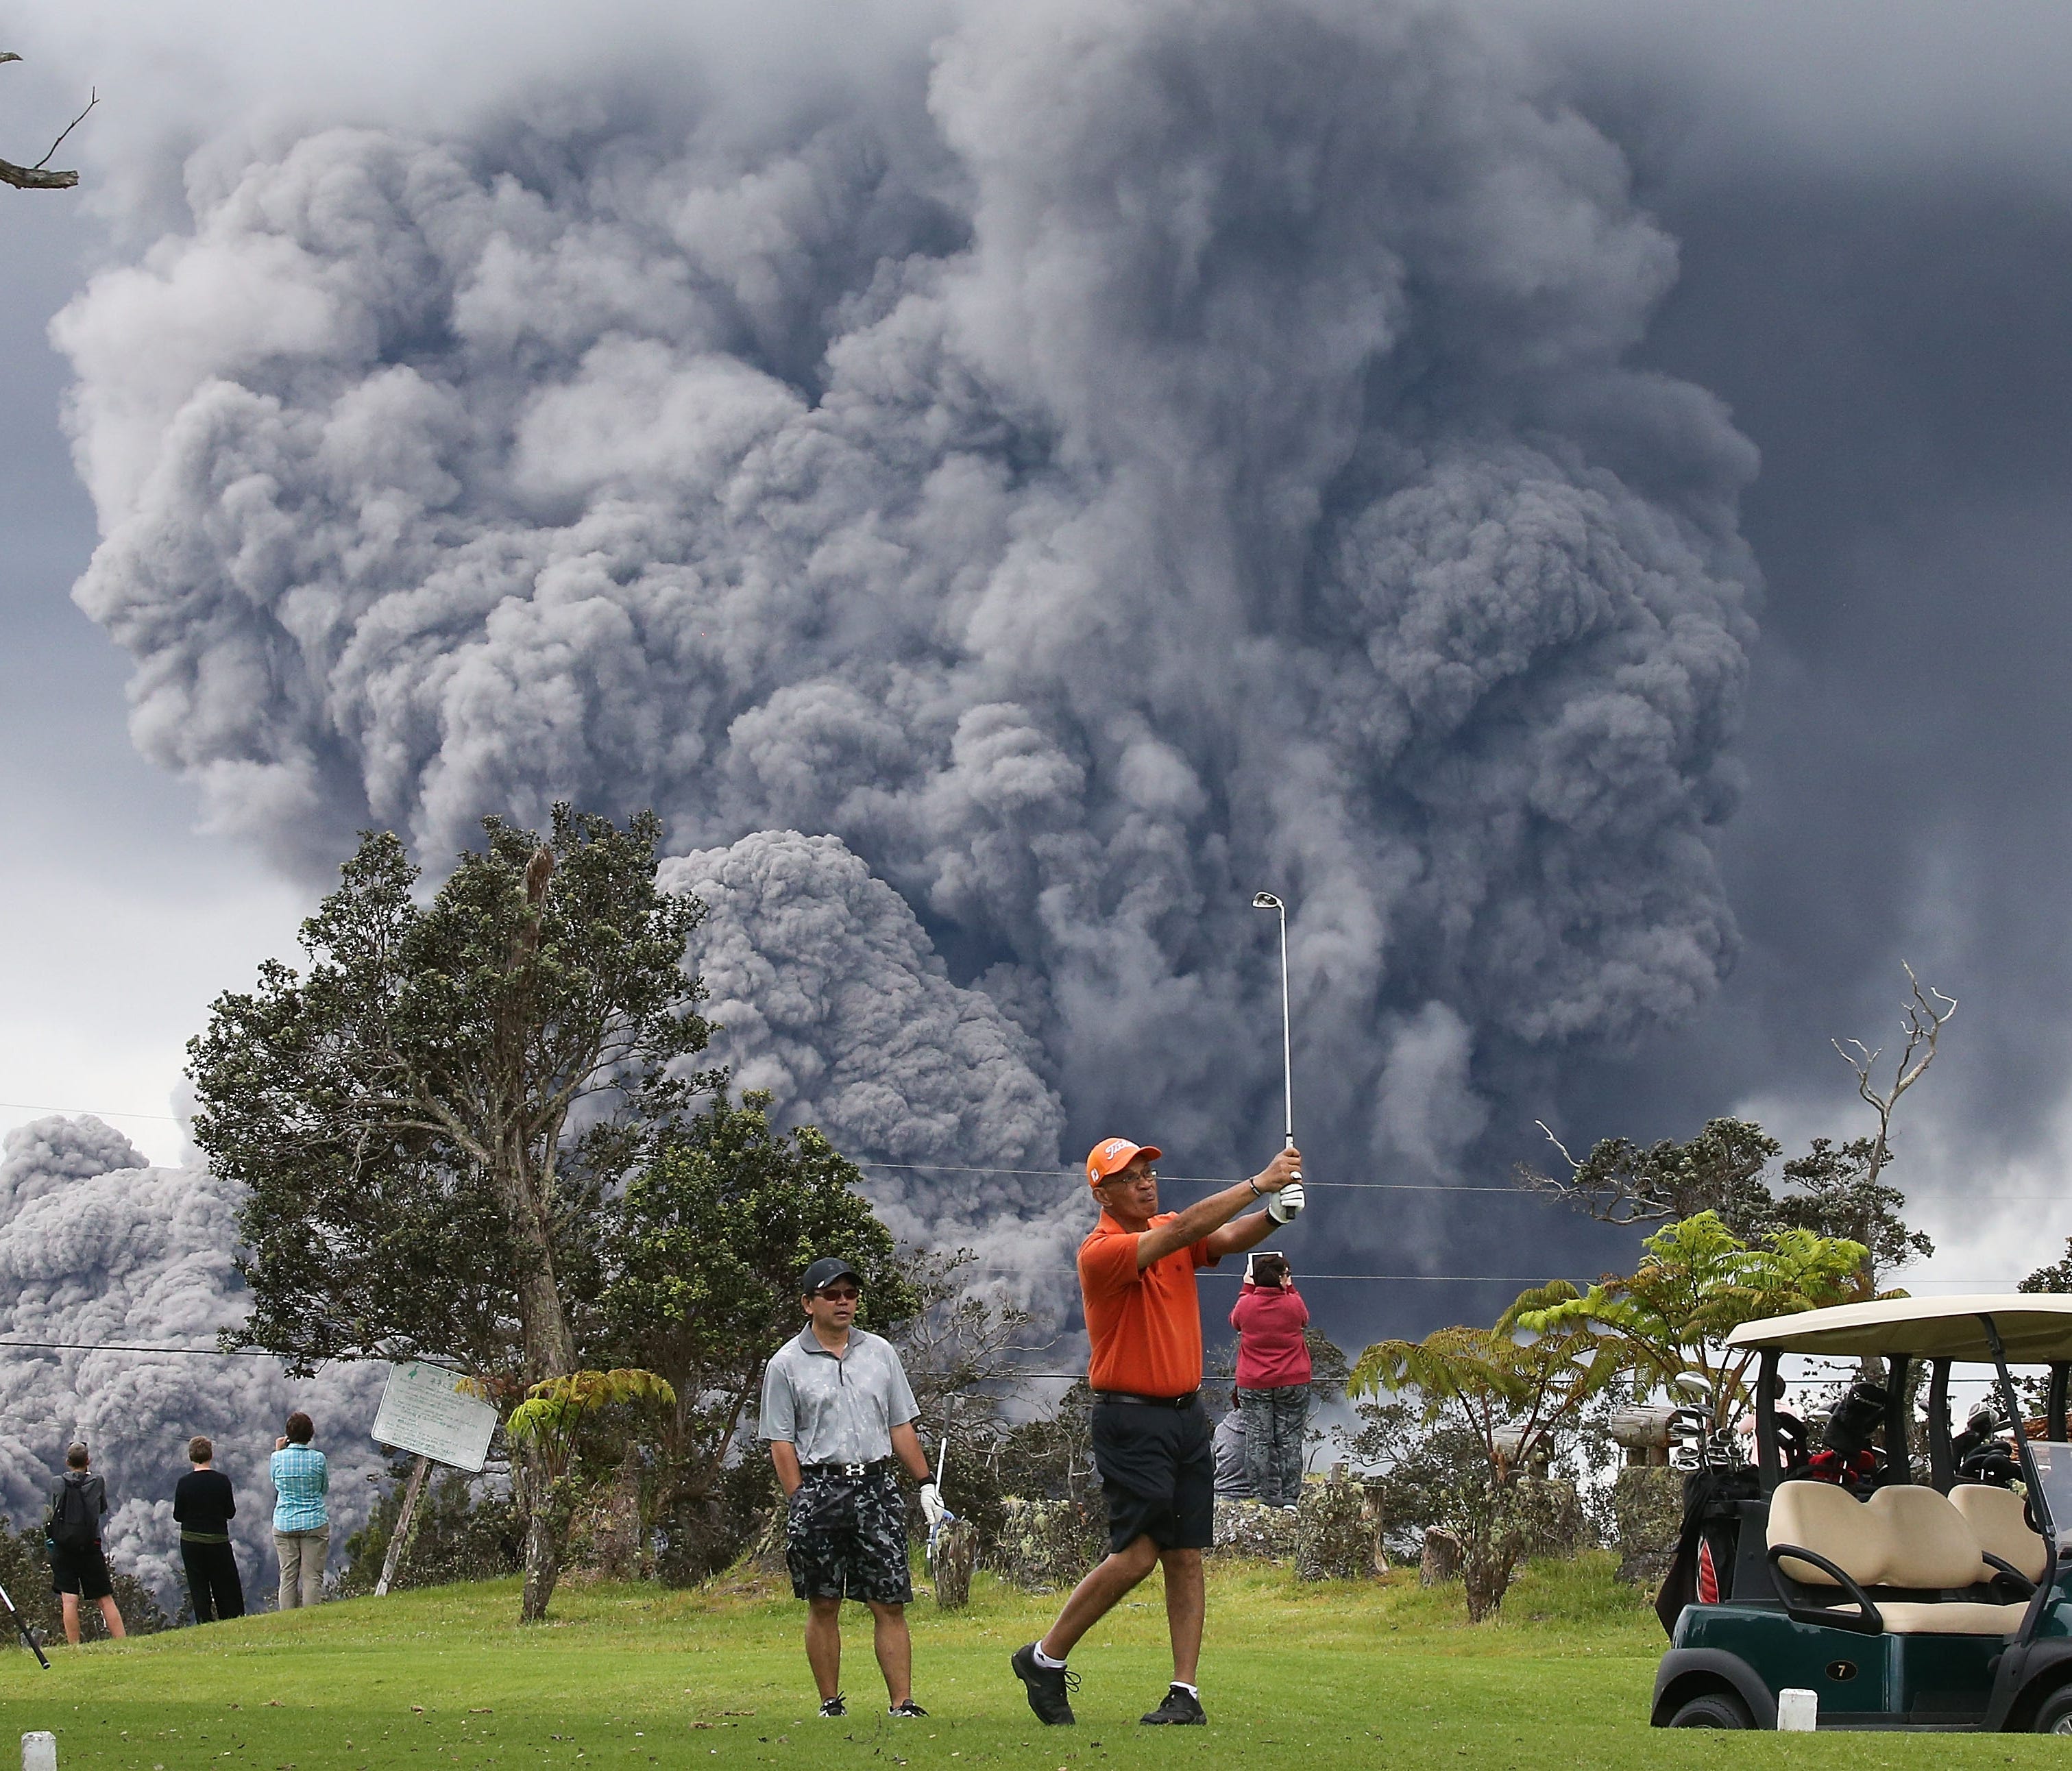  People play golf as an ash plume rises in the distance from the Kilauea volcano on Hawaii's Big Island May 15, 2018 in Hawaii Volcanoes National Park, Hawaii.